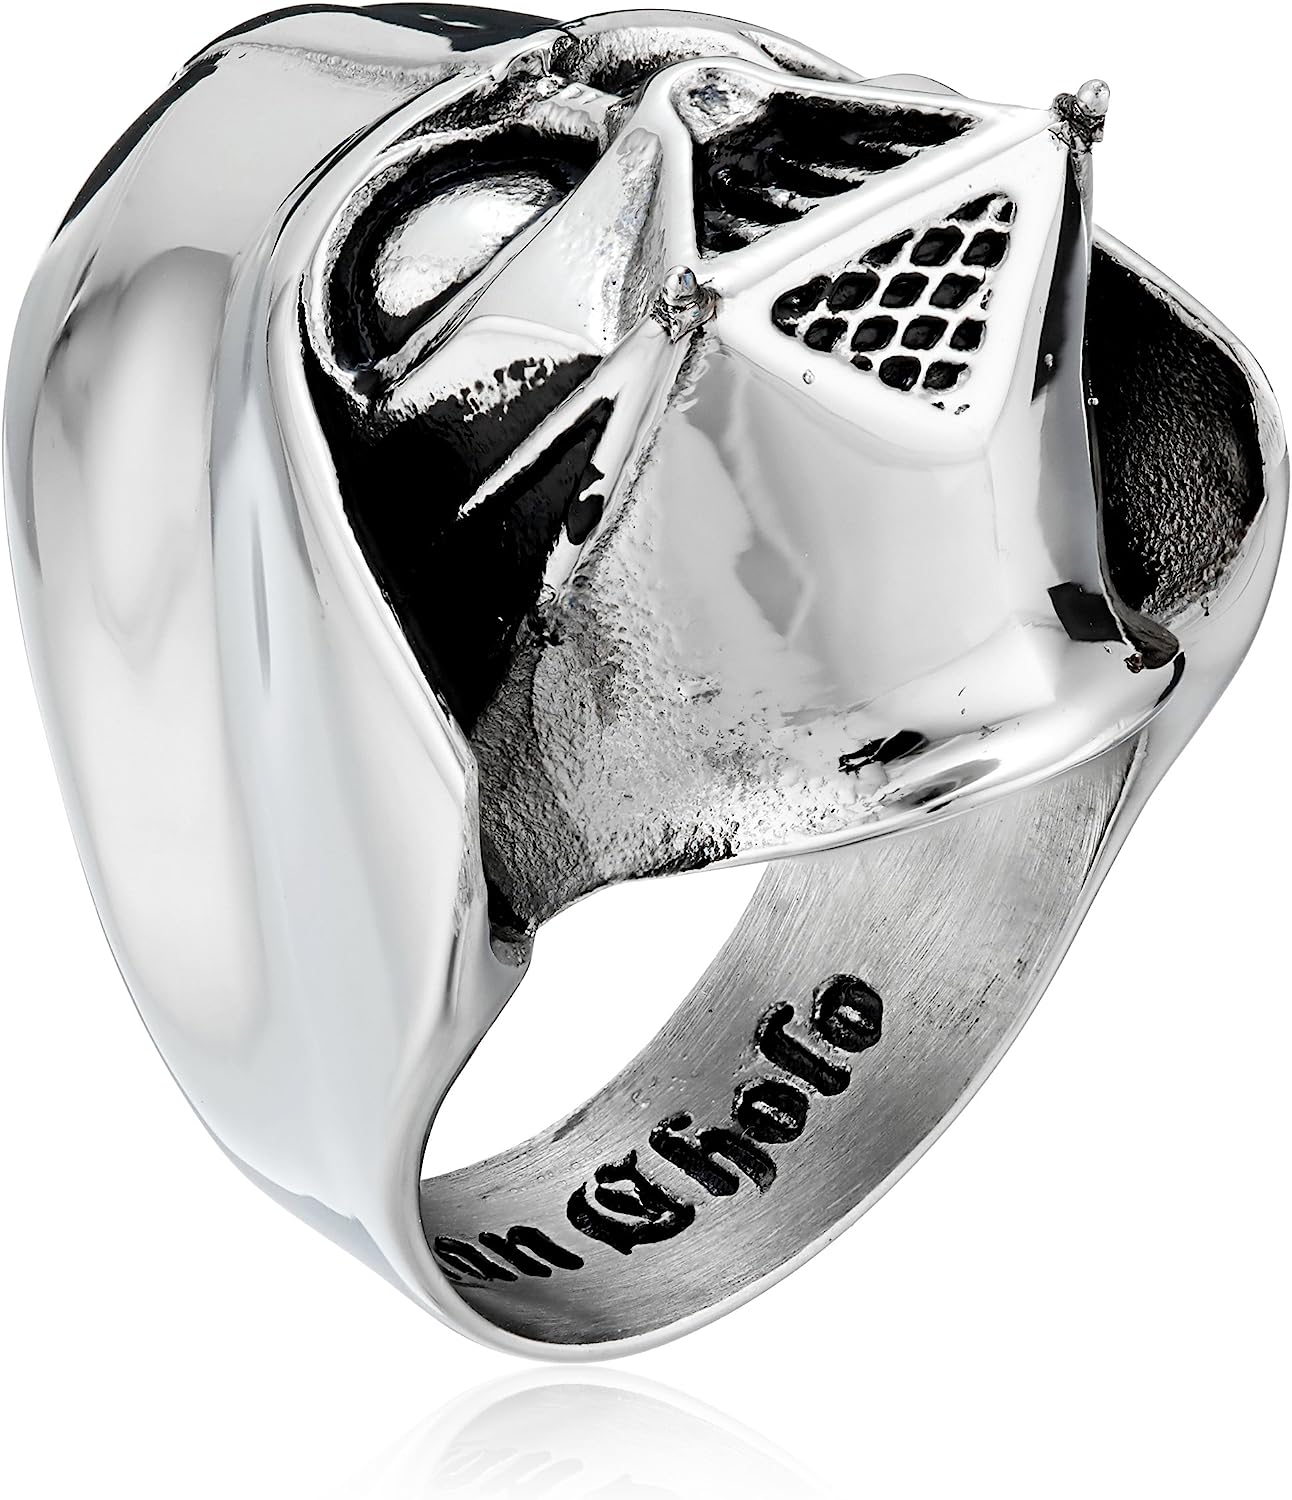 Star Wars x Han Cholo, Darth Vader Stainless Steel Ring